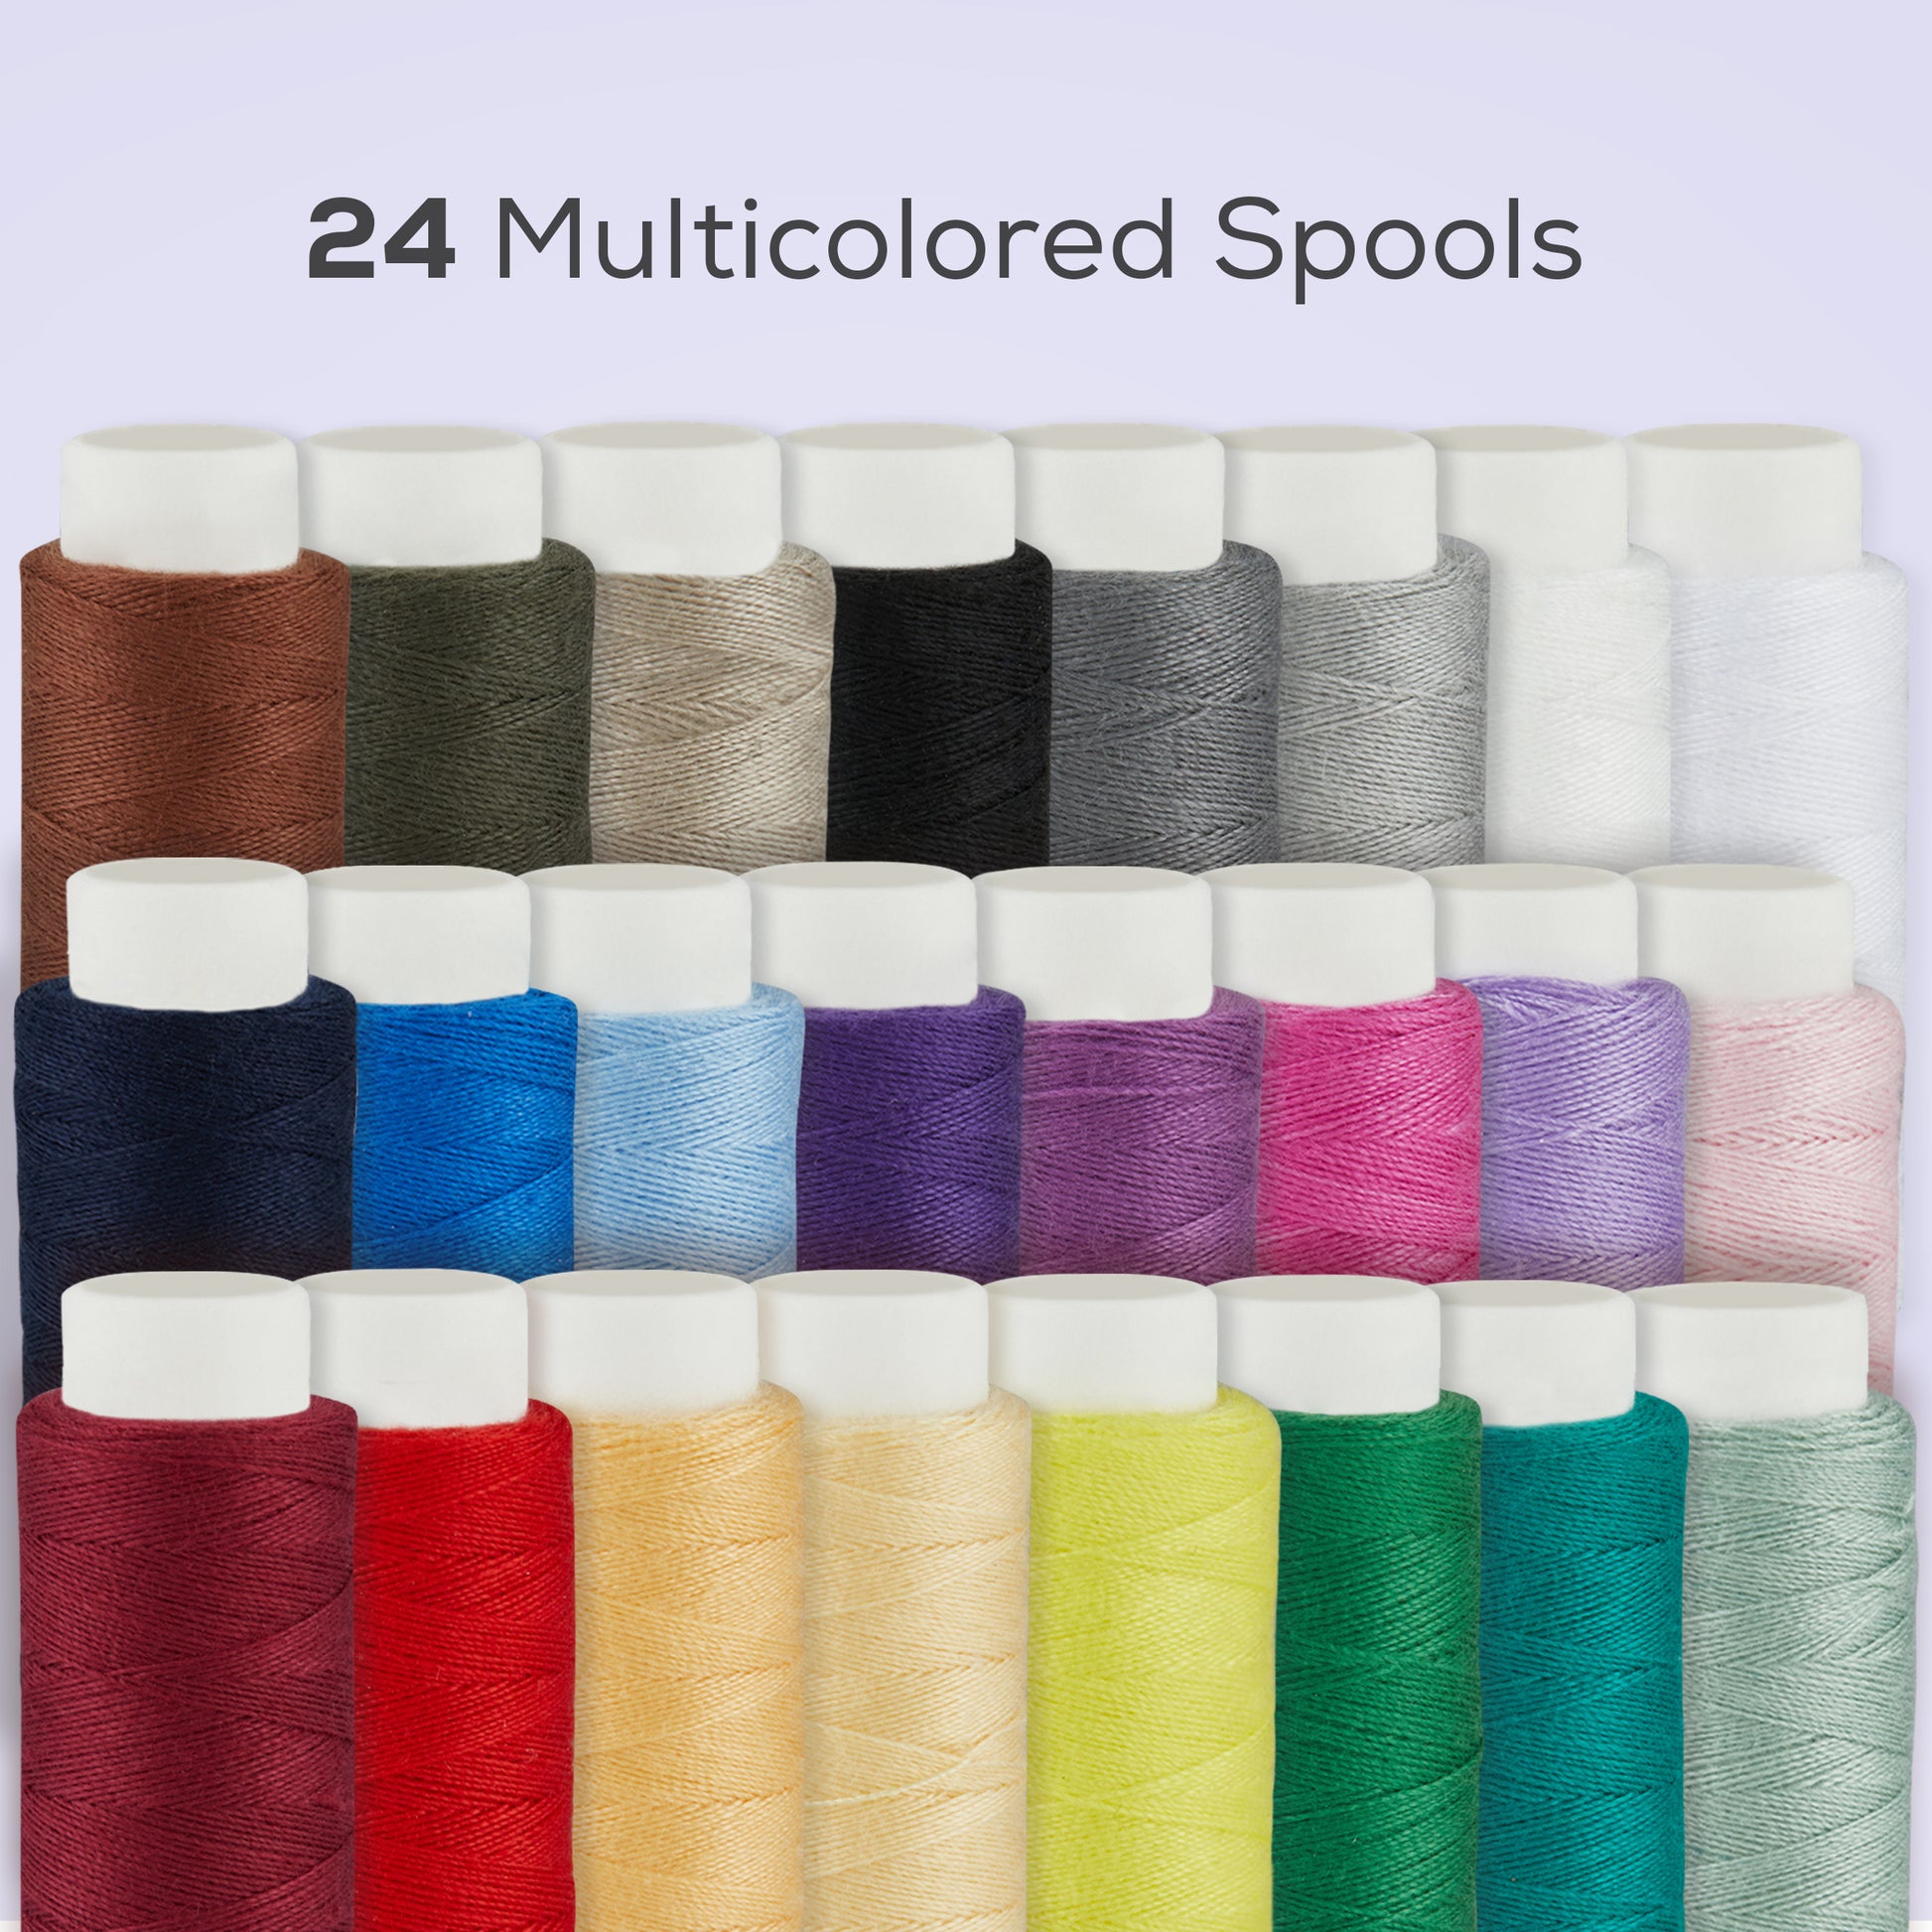 Multicolored Sewing Kit with Spools, Needles and Extra Sewing